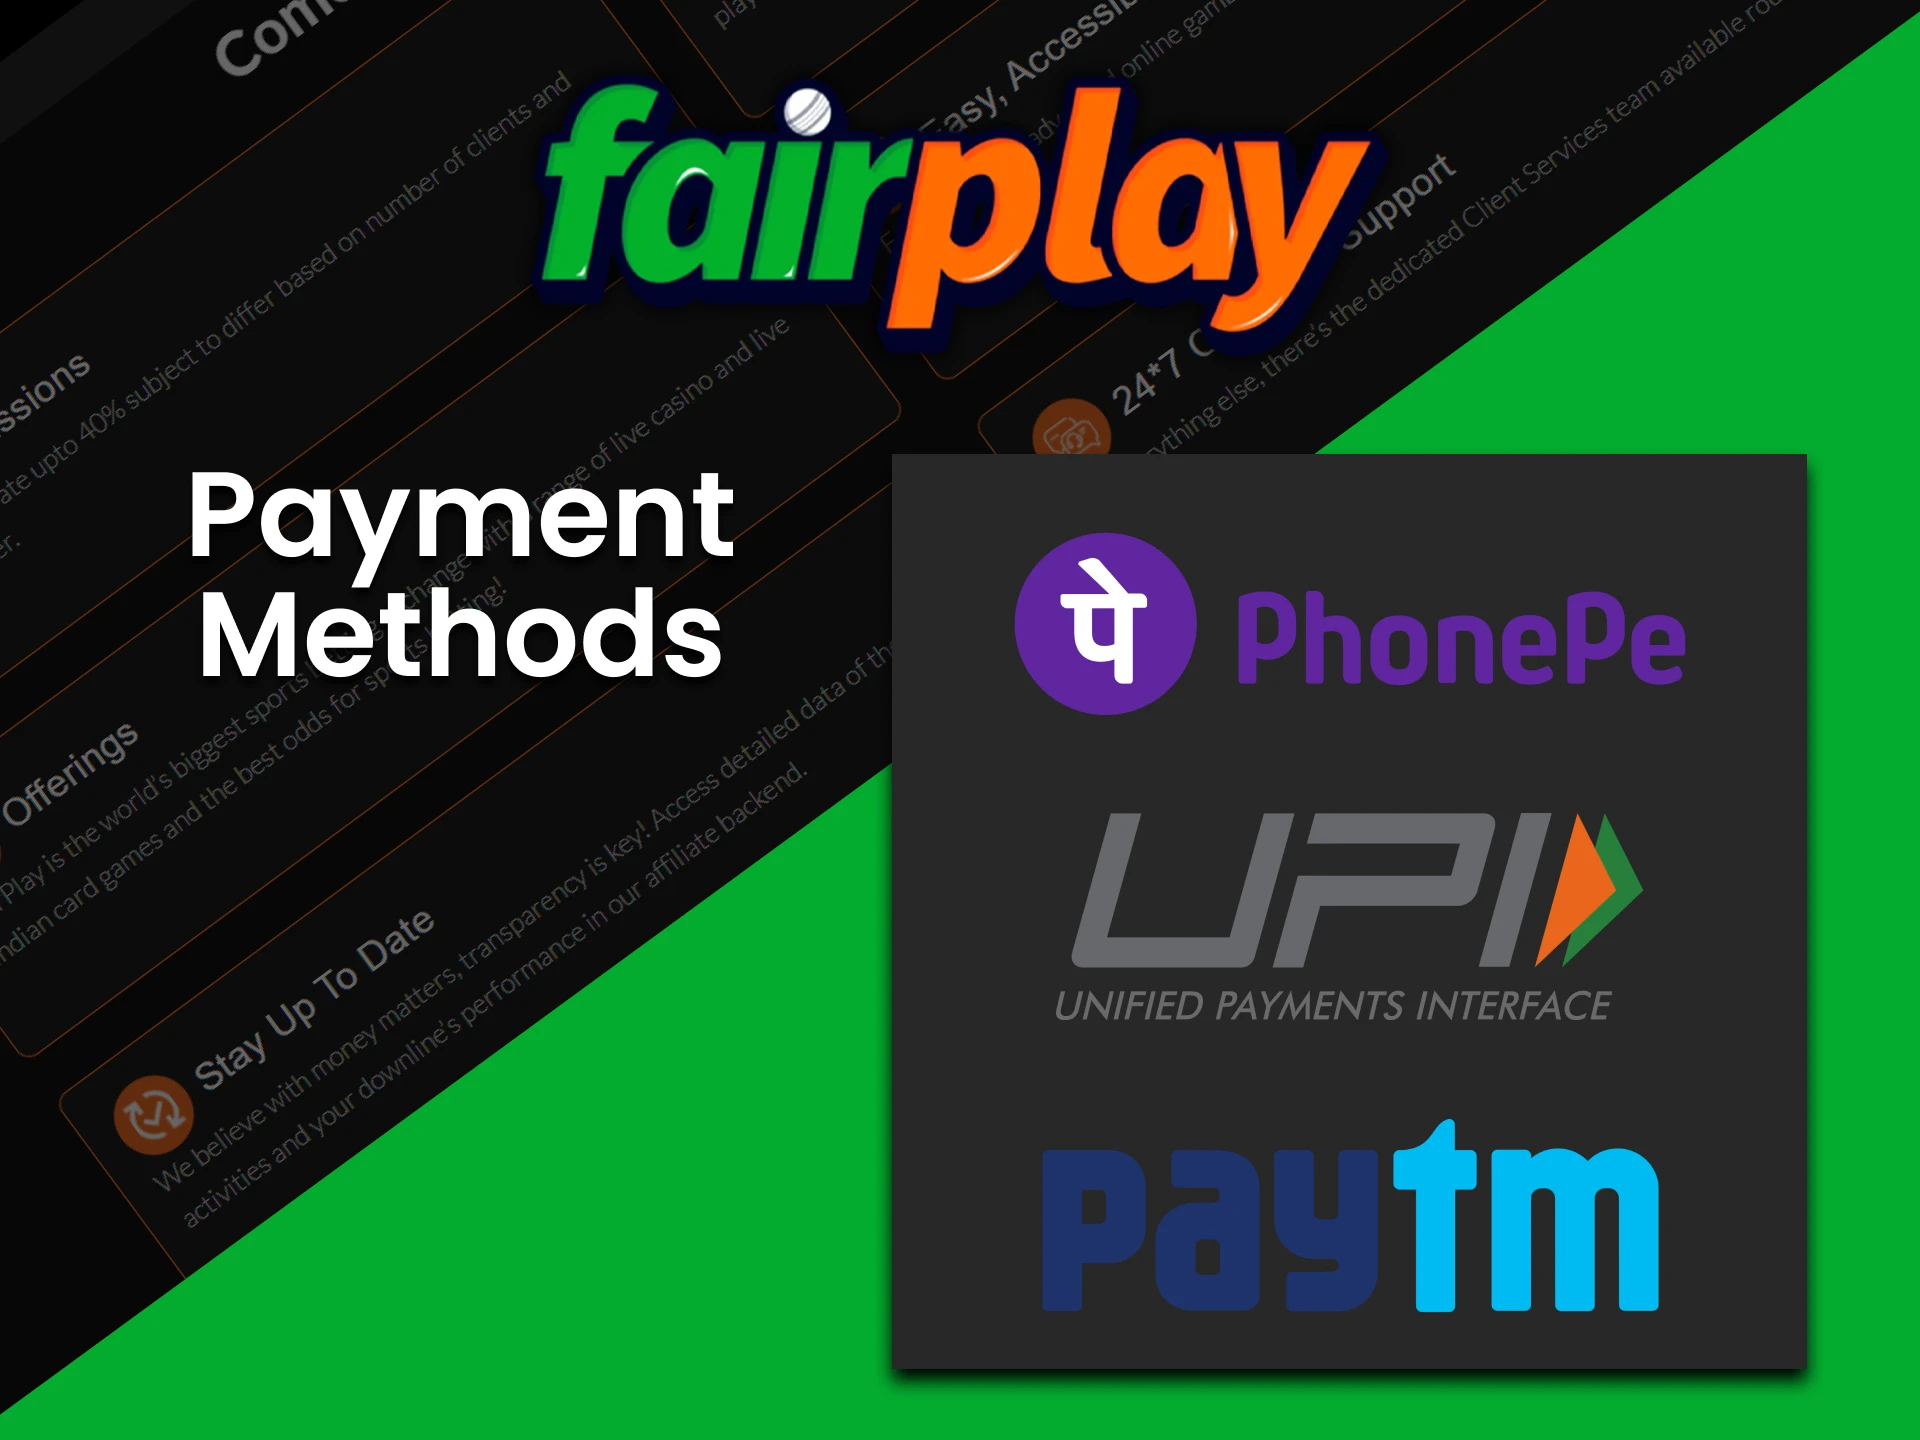 Choose your favorite payment method to use at Fairplay.